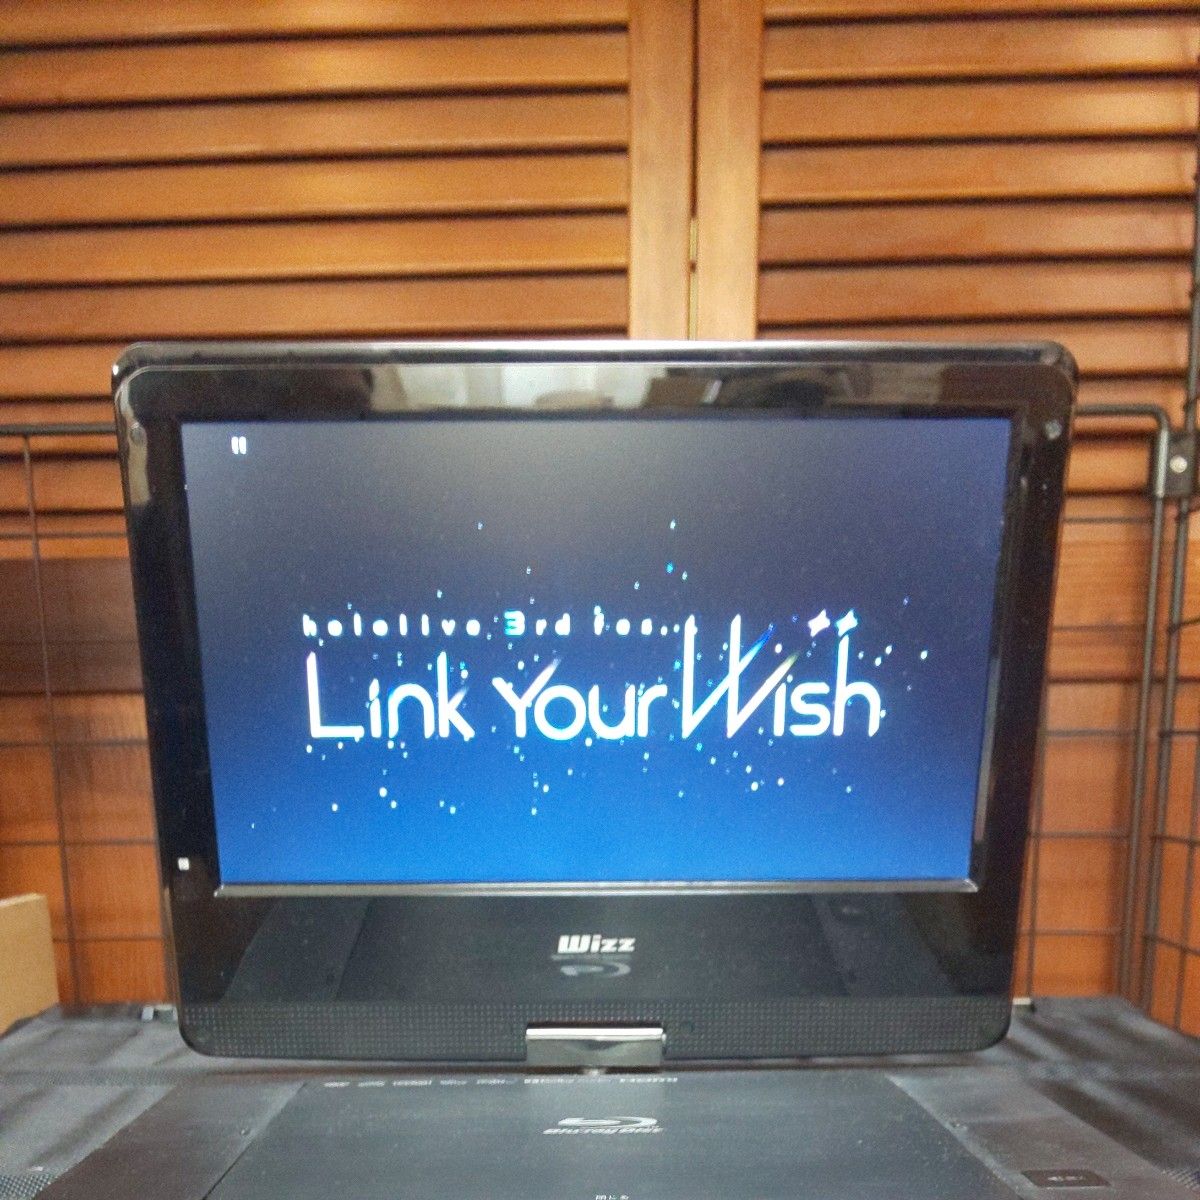 hololive 3rd fes. 「Link Your Wish」 blu-ray